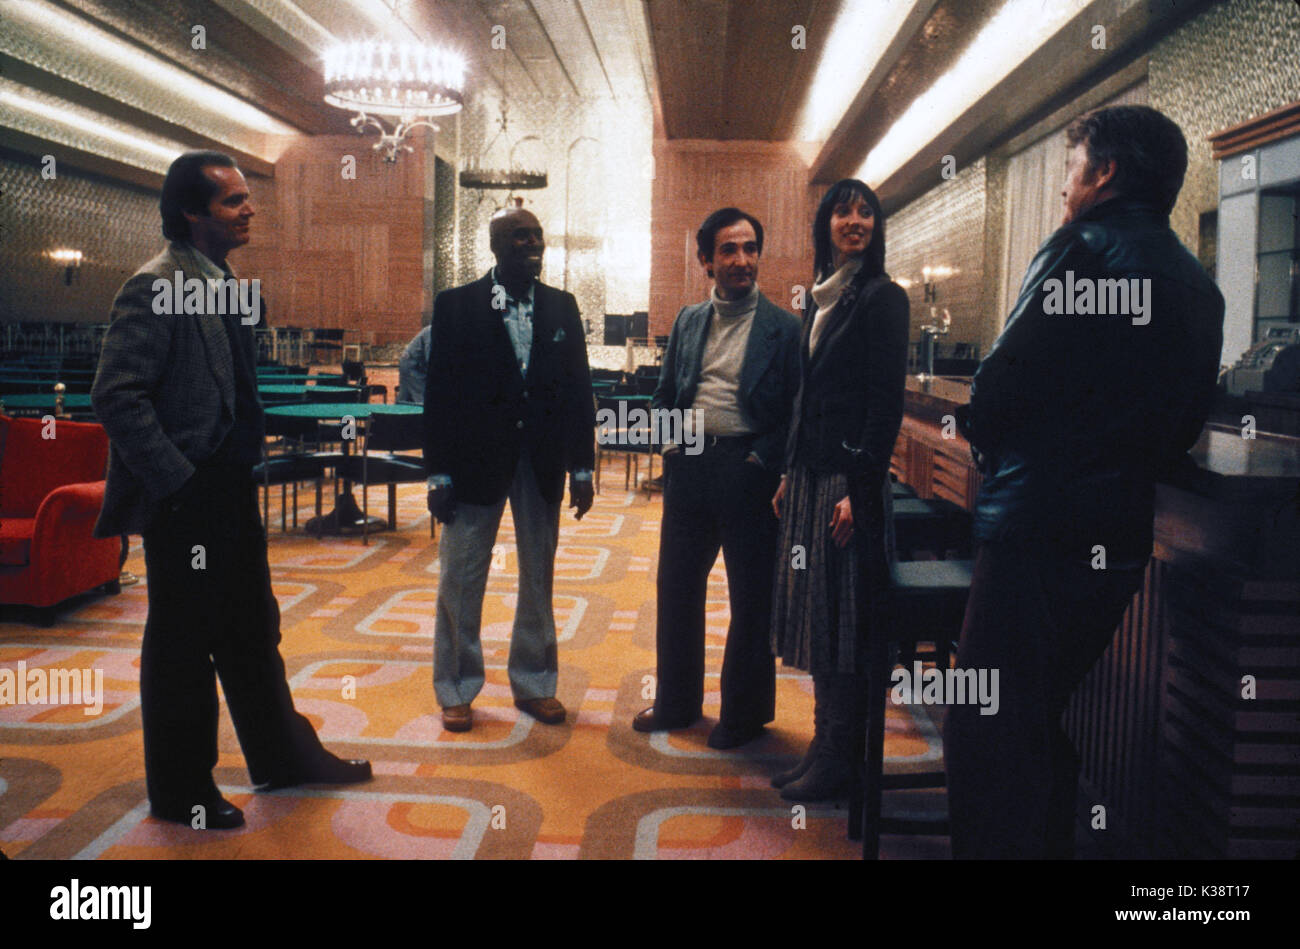 THE SHINING JACK NICHOLSON, SCATMAN CROTHERS, , SHELLEY DUVALL, [?]     Date: 1980 Stock Photo